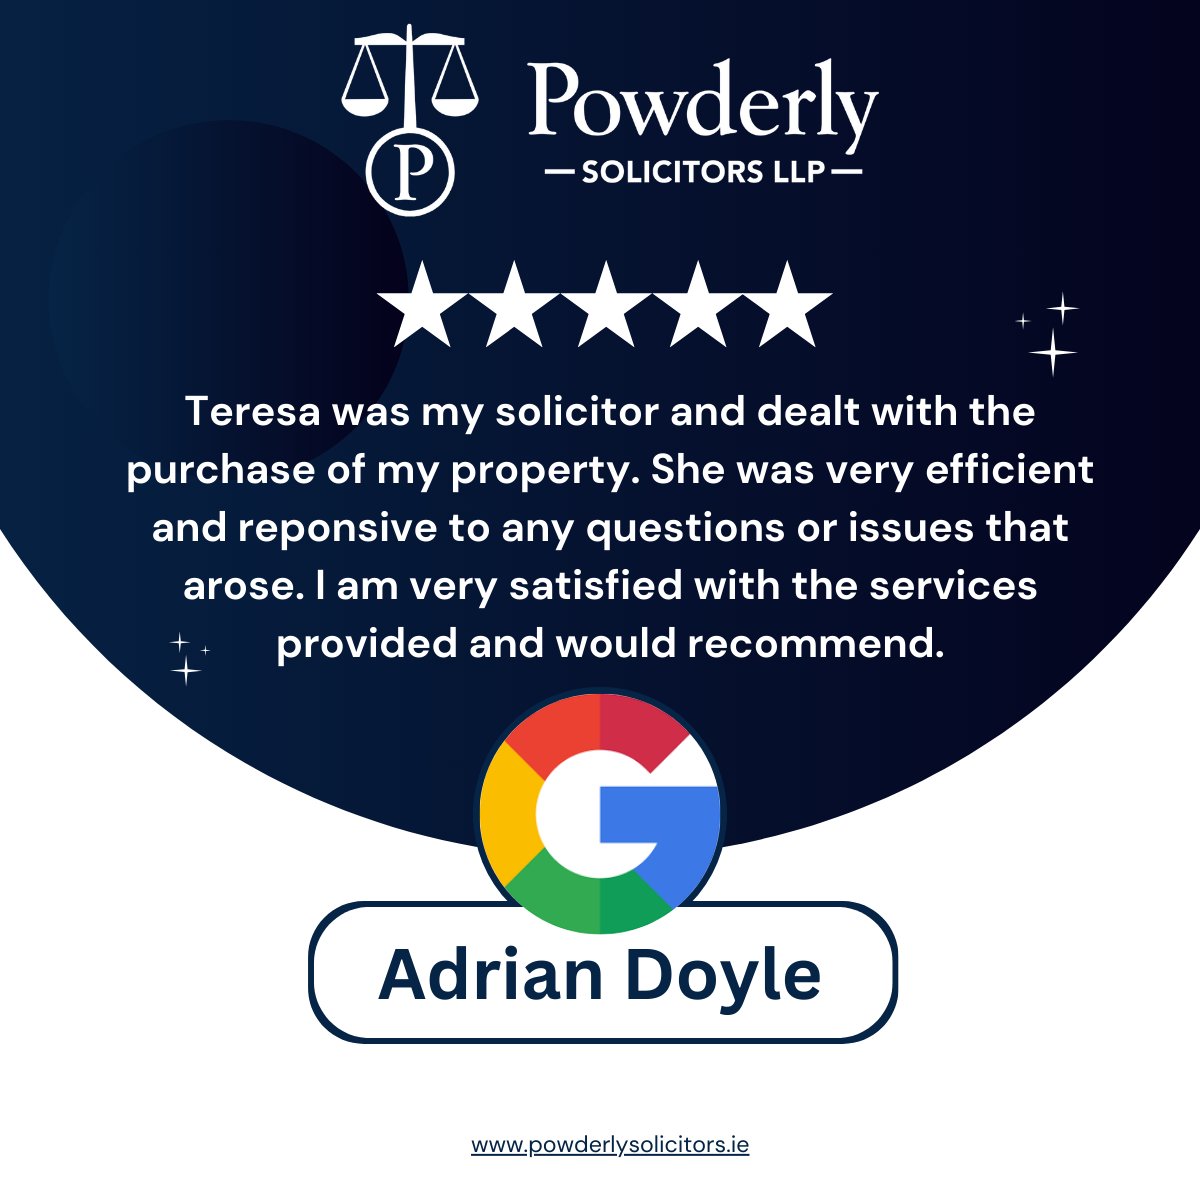 Huge thank you to Adrian Doyle for your wonderful 5 Star Review on Google for Powderly Solicitors. Delighted you're happy with our service & proud to share your comments #CustomerExperience #irishlawyer #legalservices #legaladvice See more reviews here: bit.ly/3OV31y5